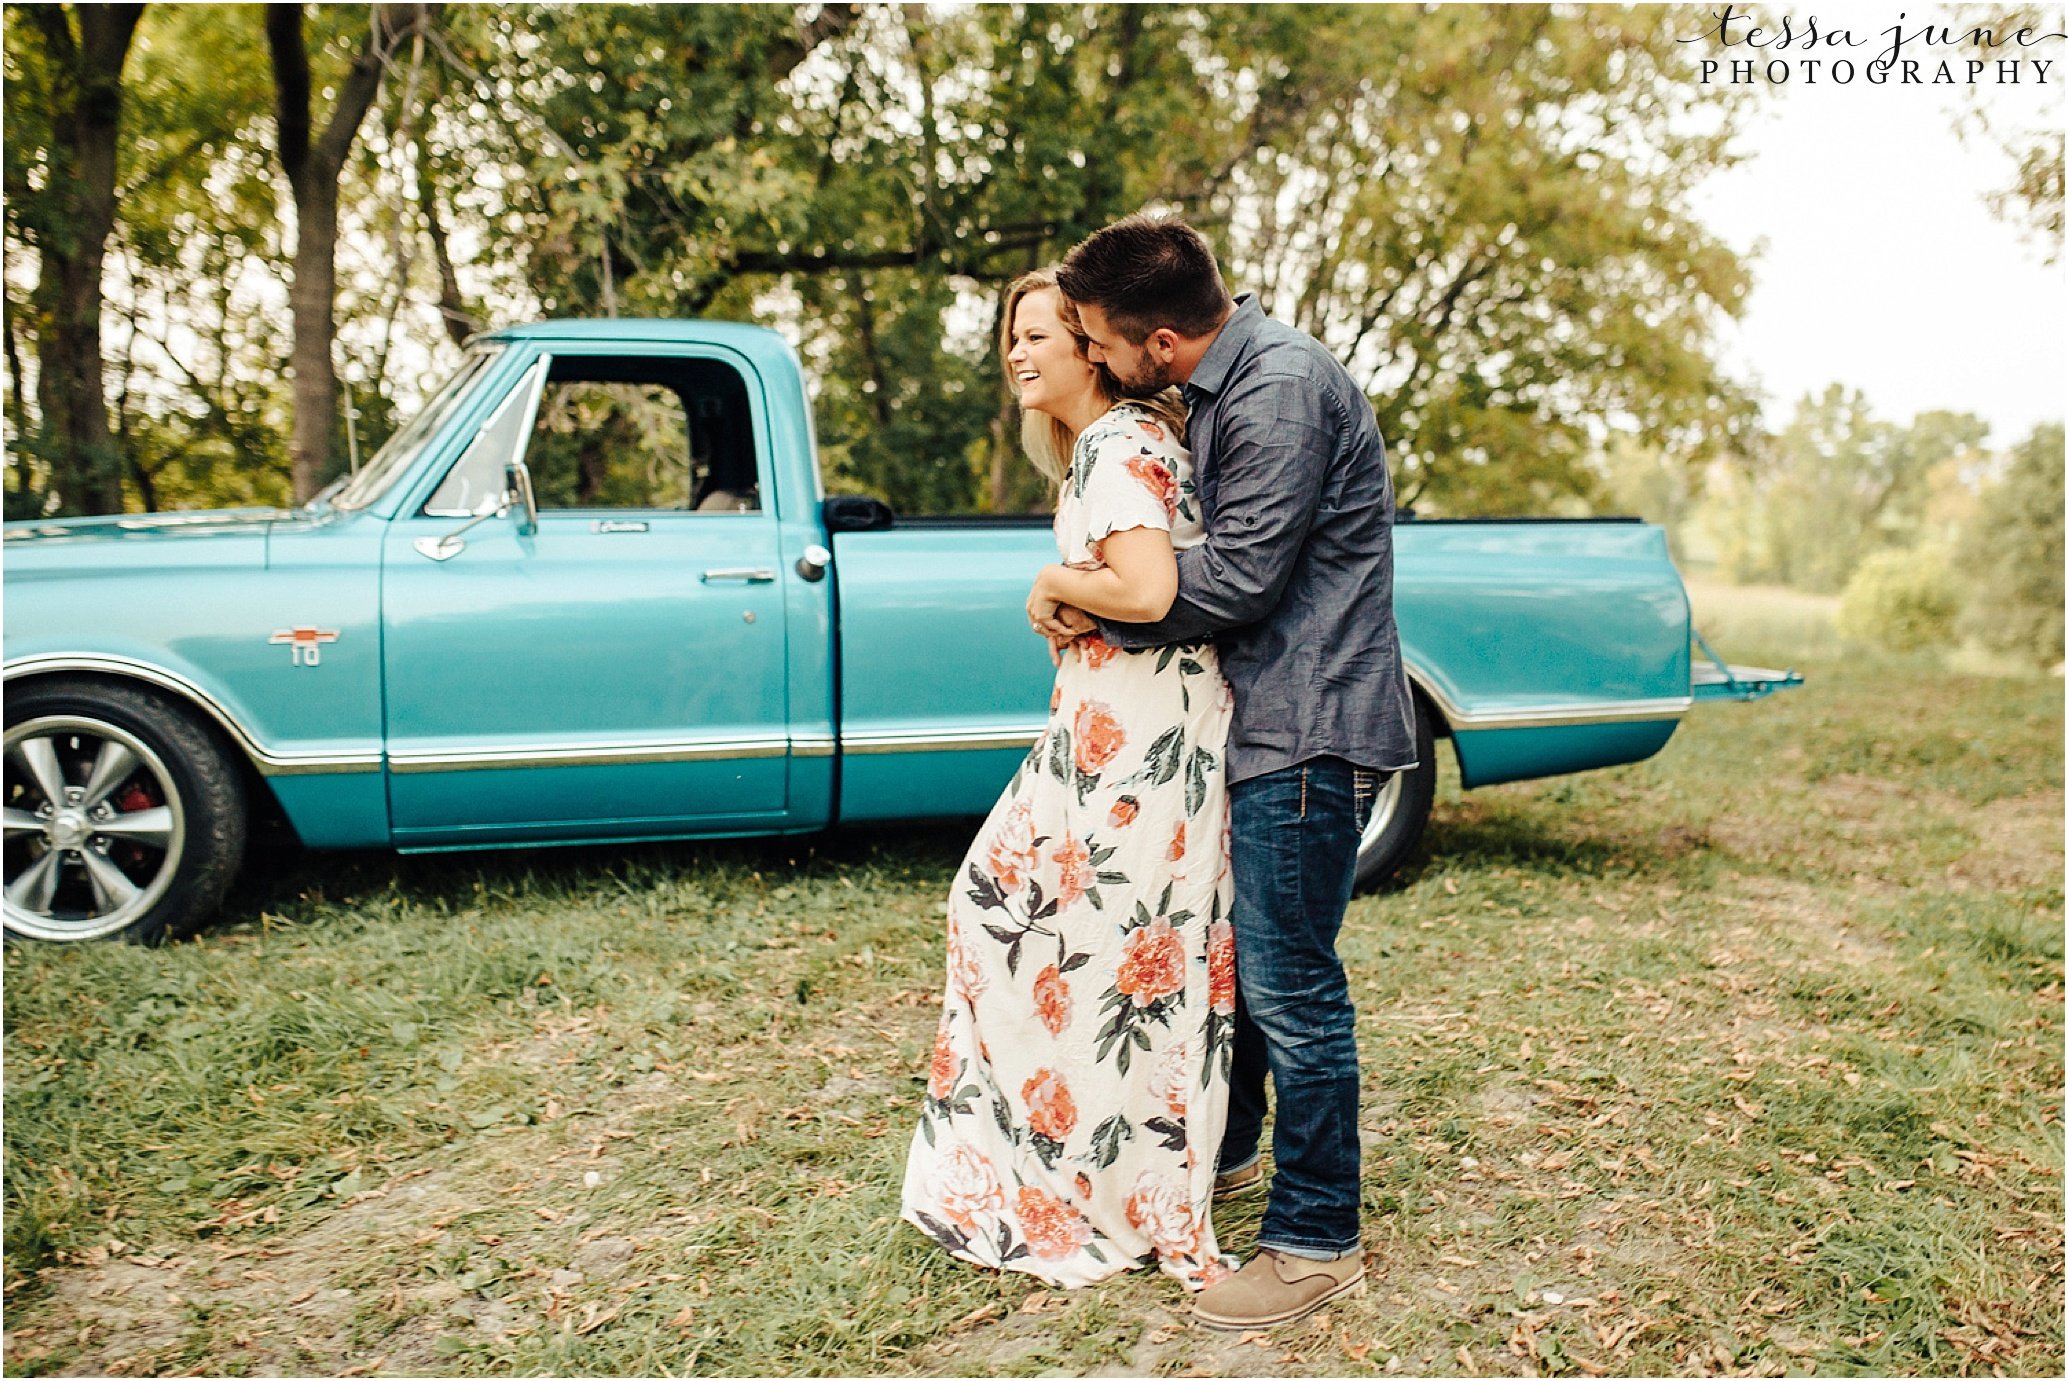 st-cloud-wedding-photographer-engagement-session-with-old-truck-35.jpeg